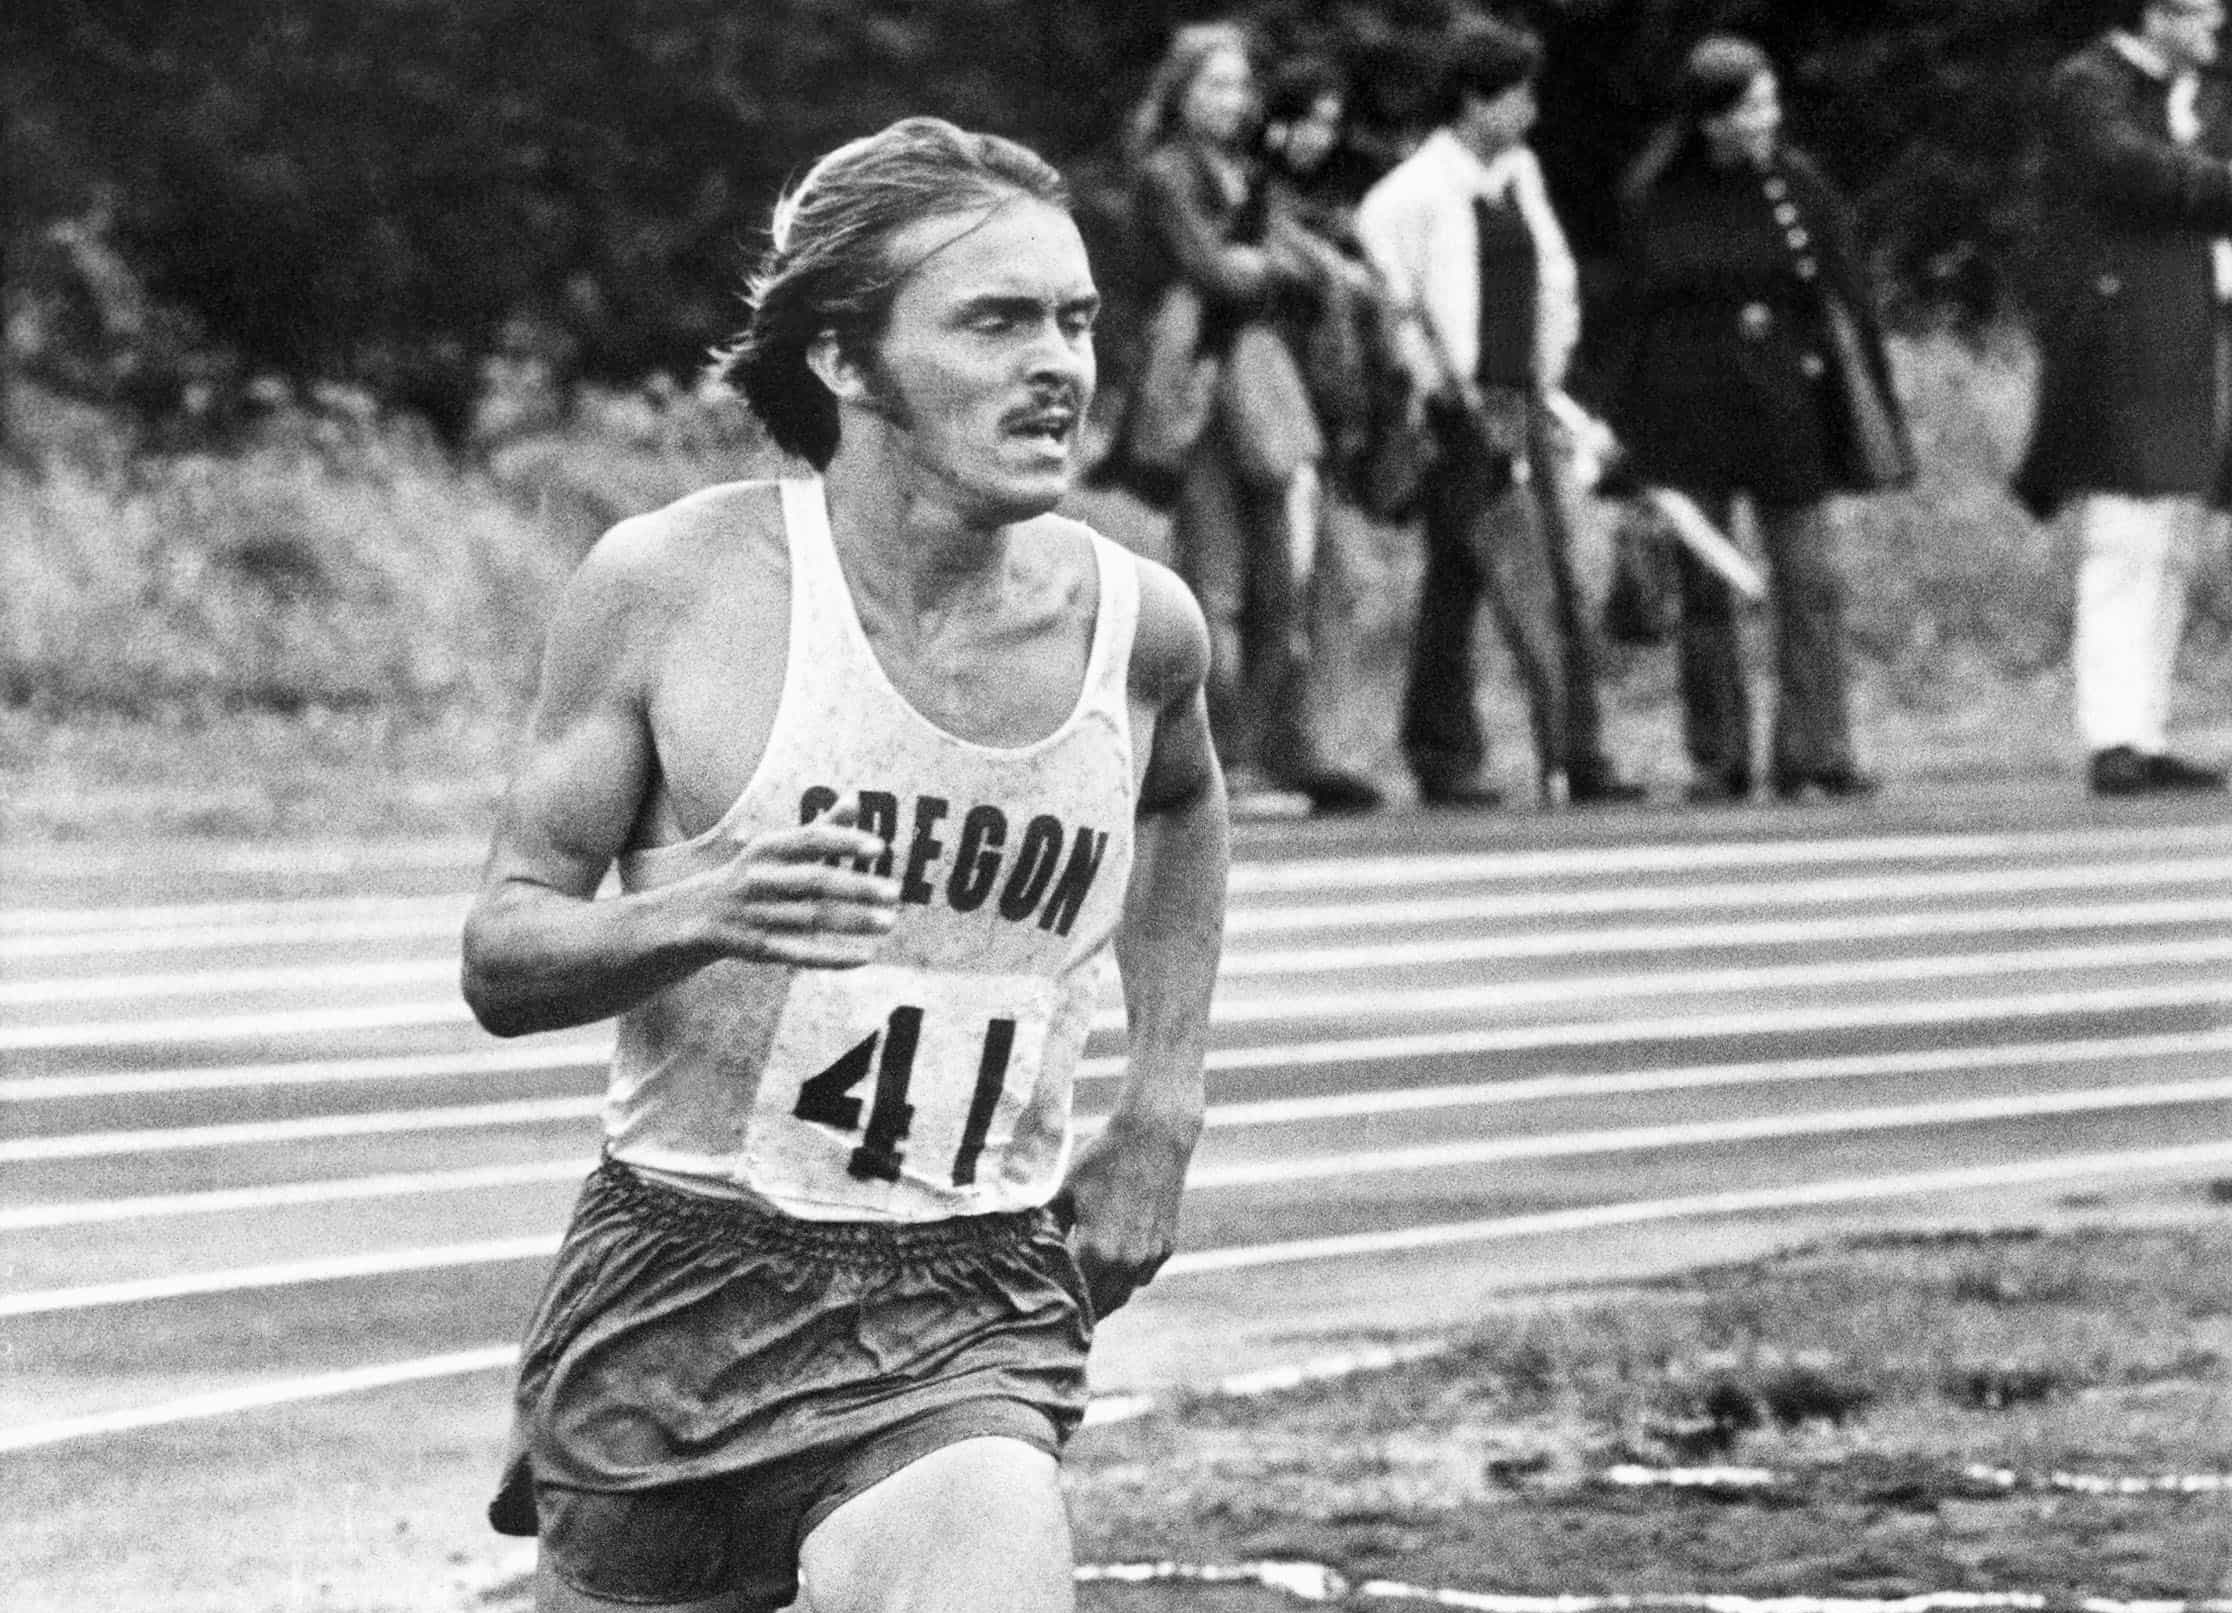 How Many College Cross Country Races Did Steve Prefontaine Lose